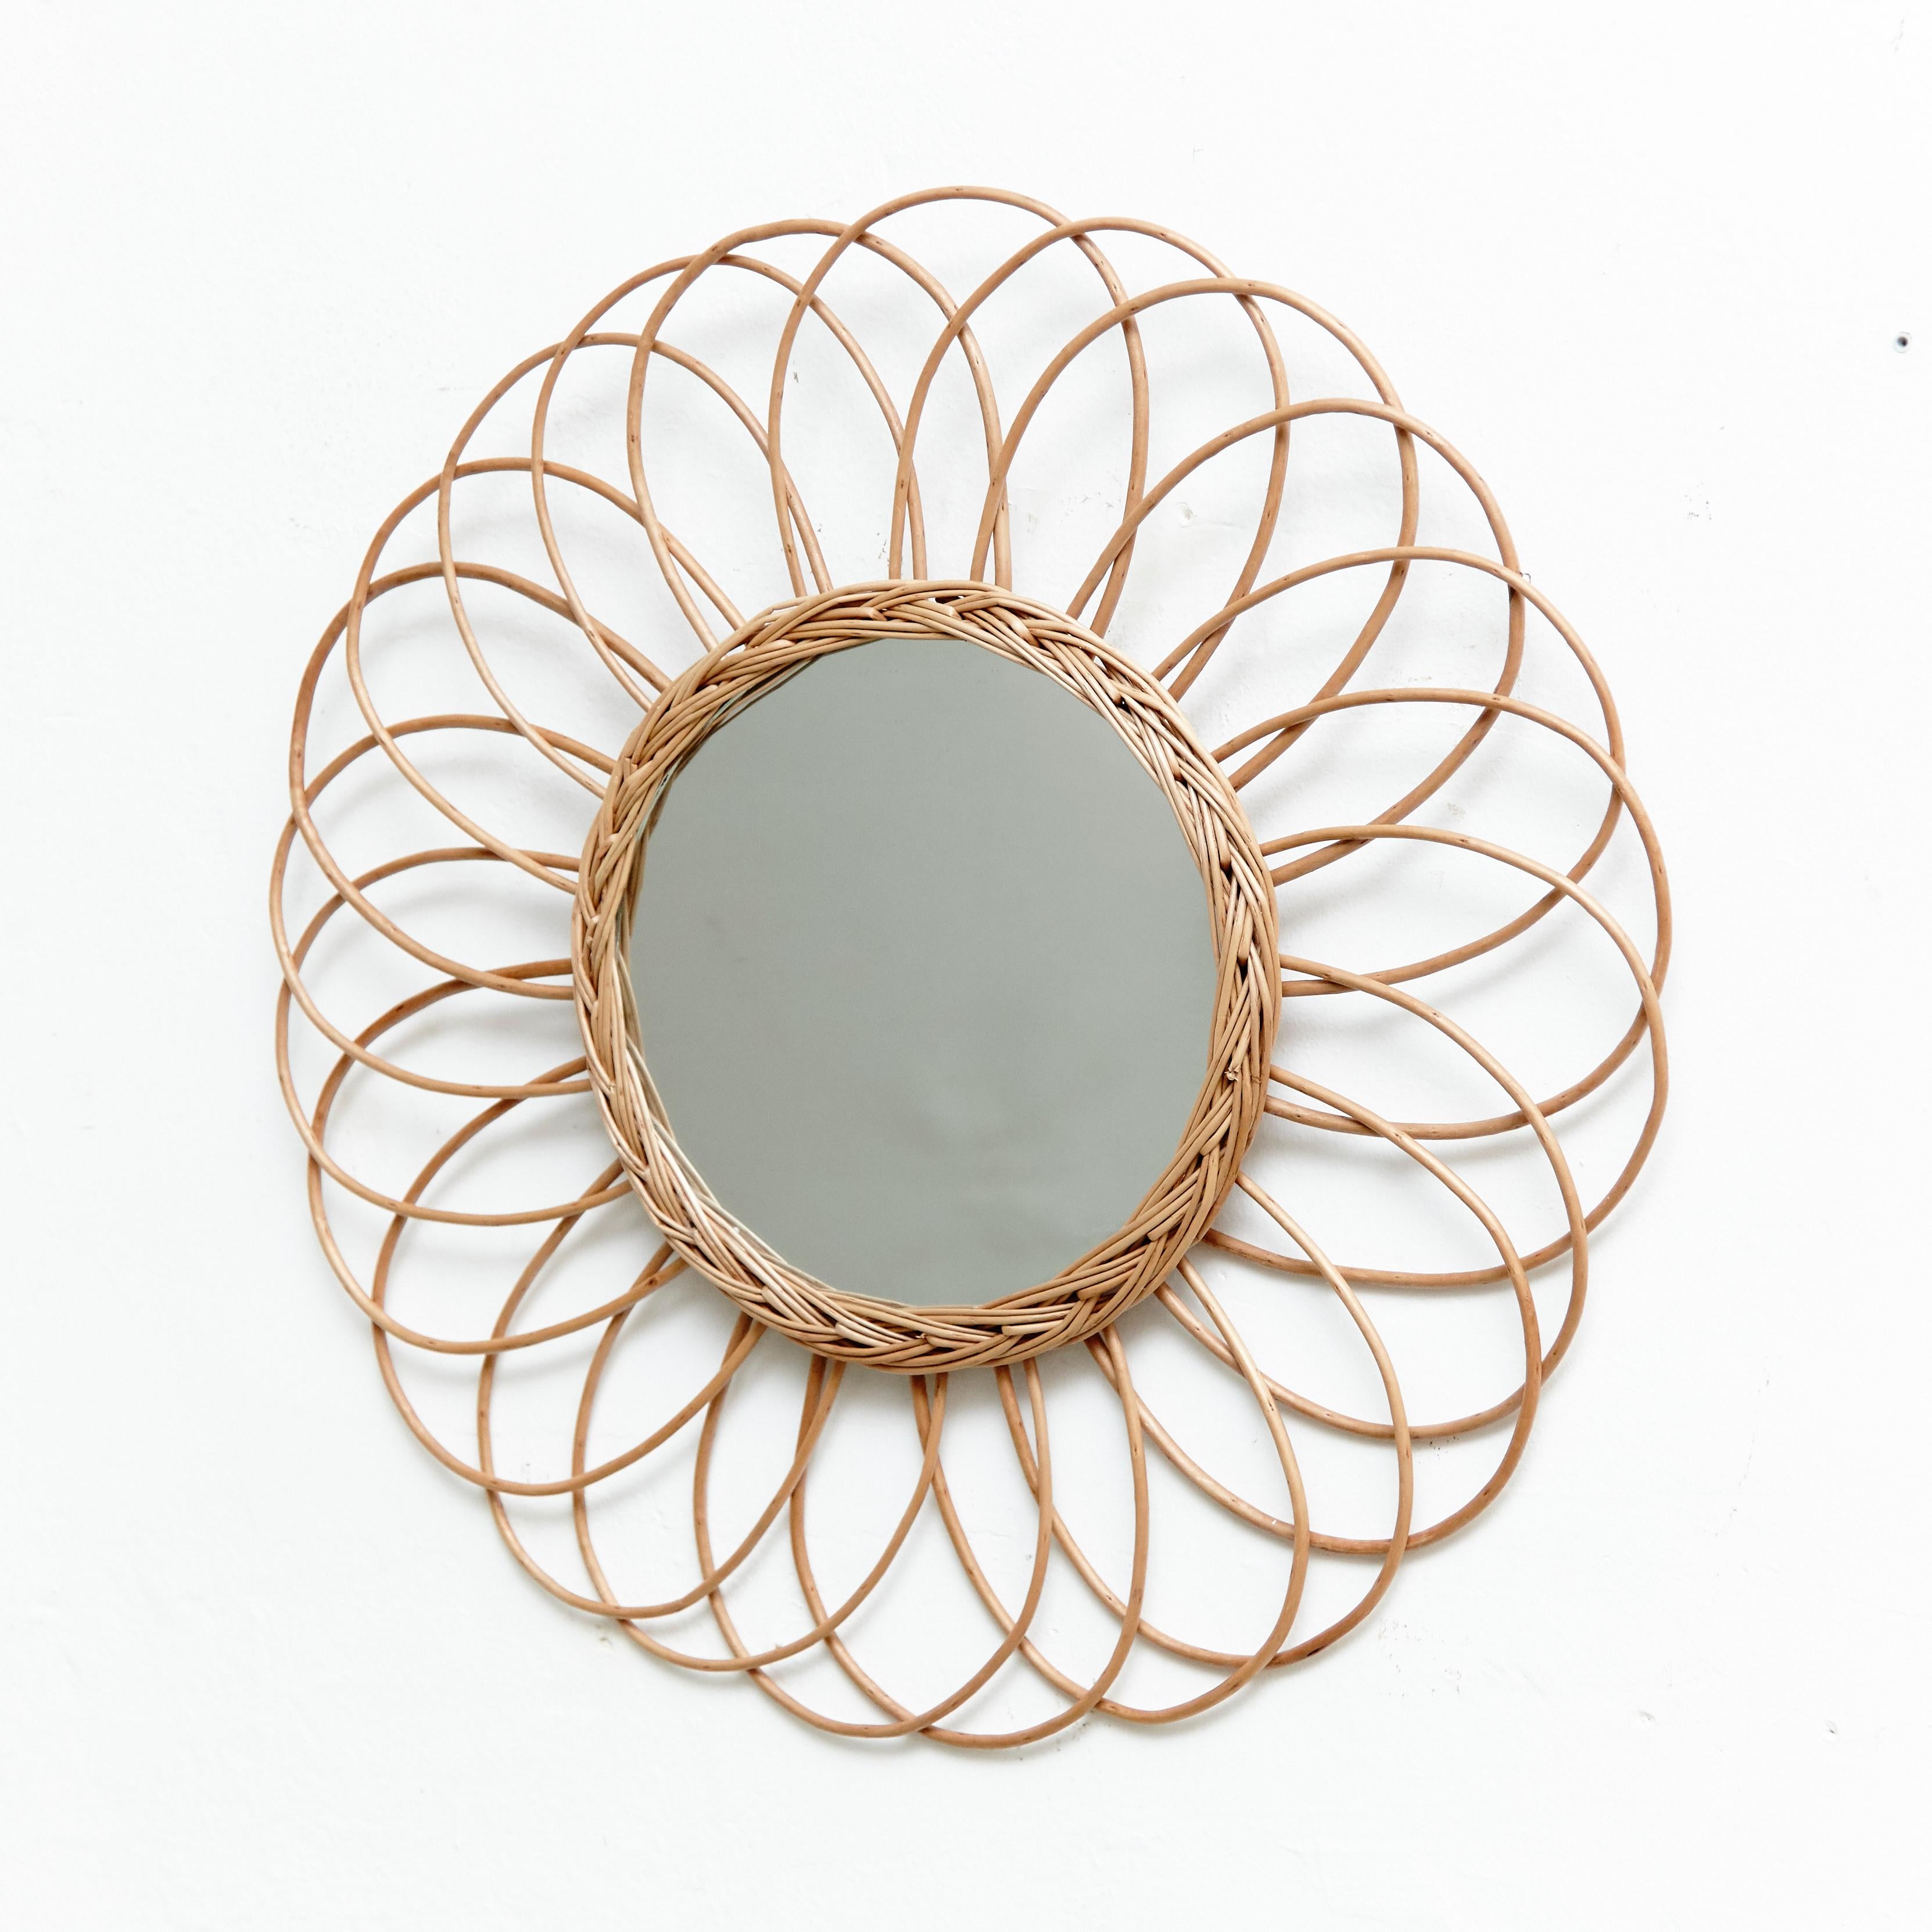 Mid-Century Modern rattan handcrafted sunburst wall mirror, circa 1960
Traditionally manufactured in France.
By unknown designer.

In original condition with minor wear consistent of age and use, preserving a beautiful patina.

 